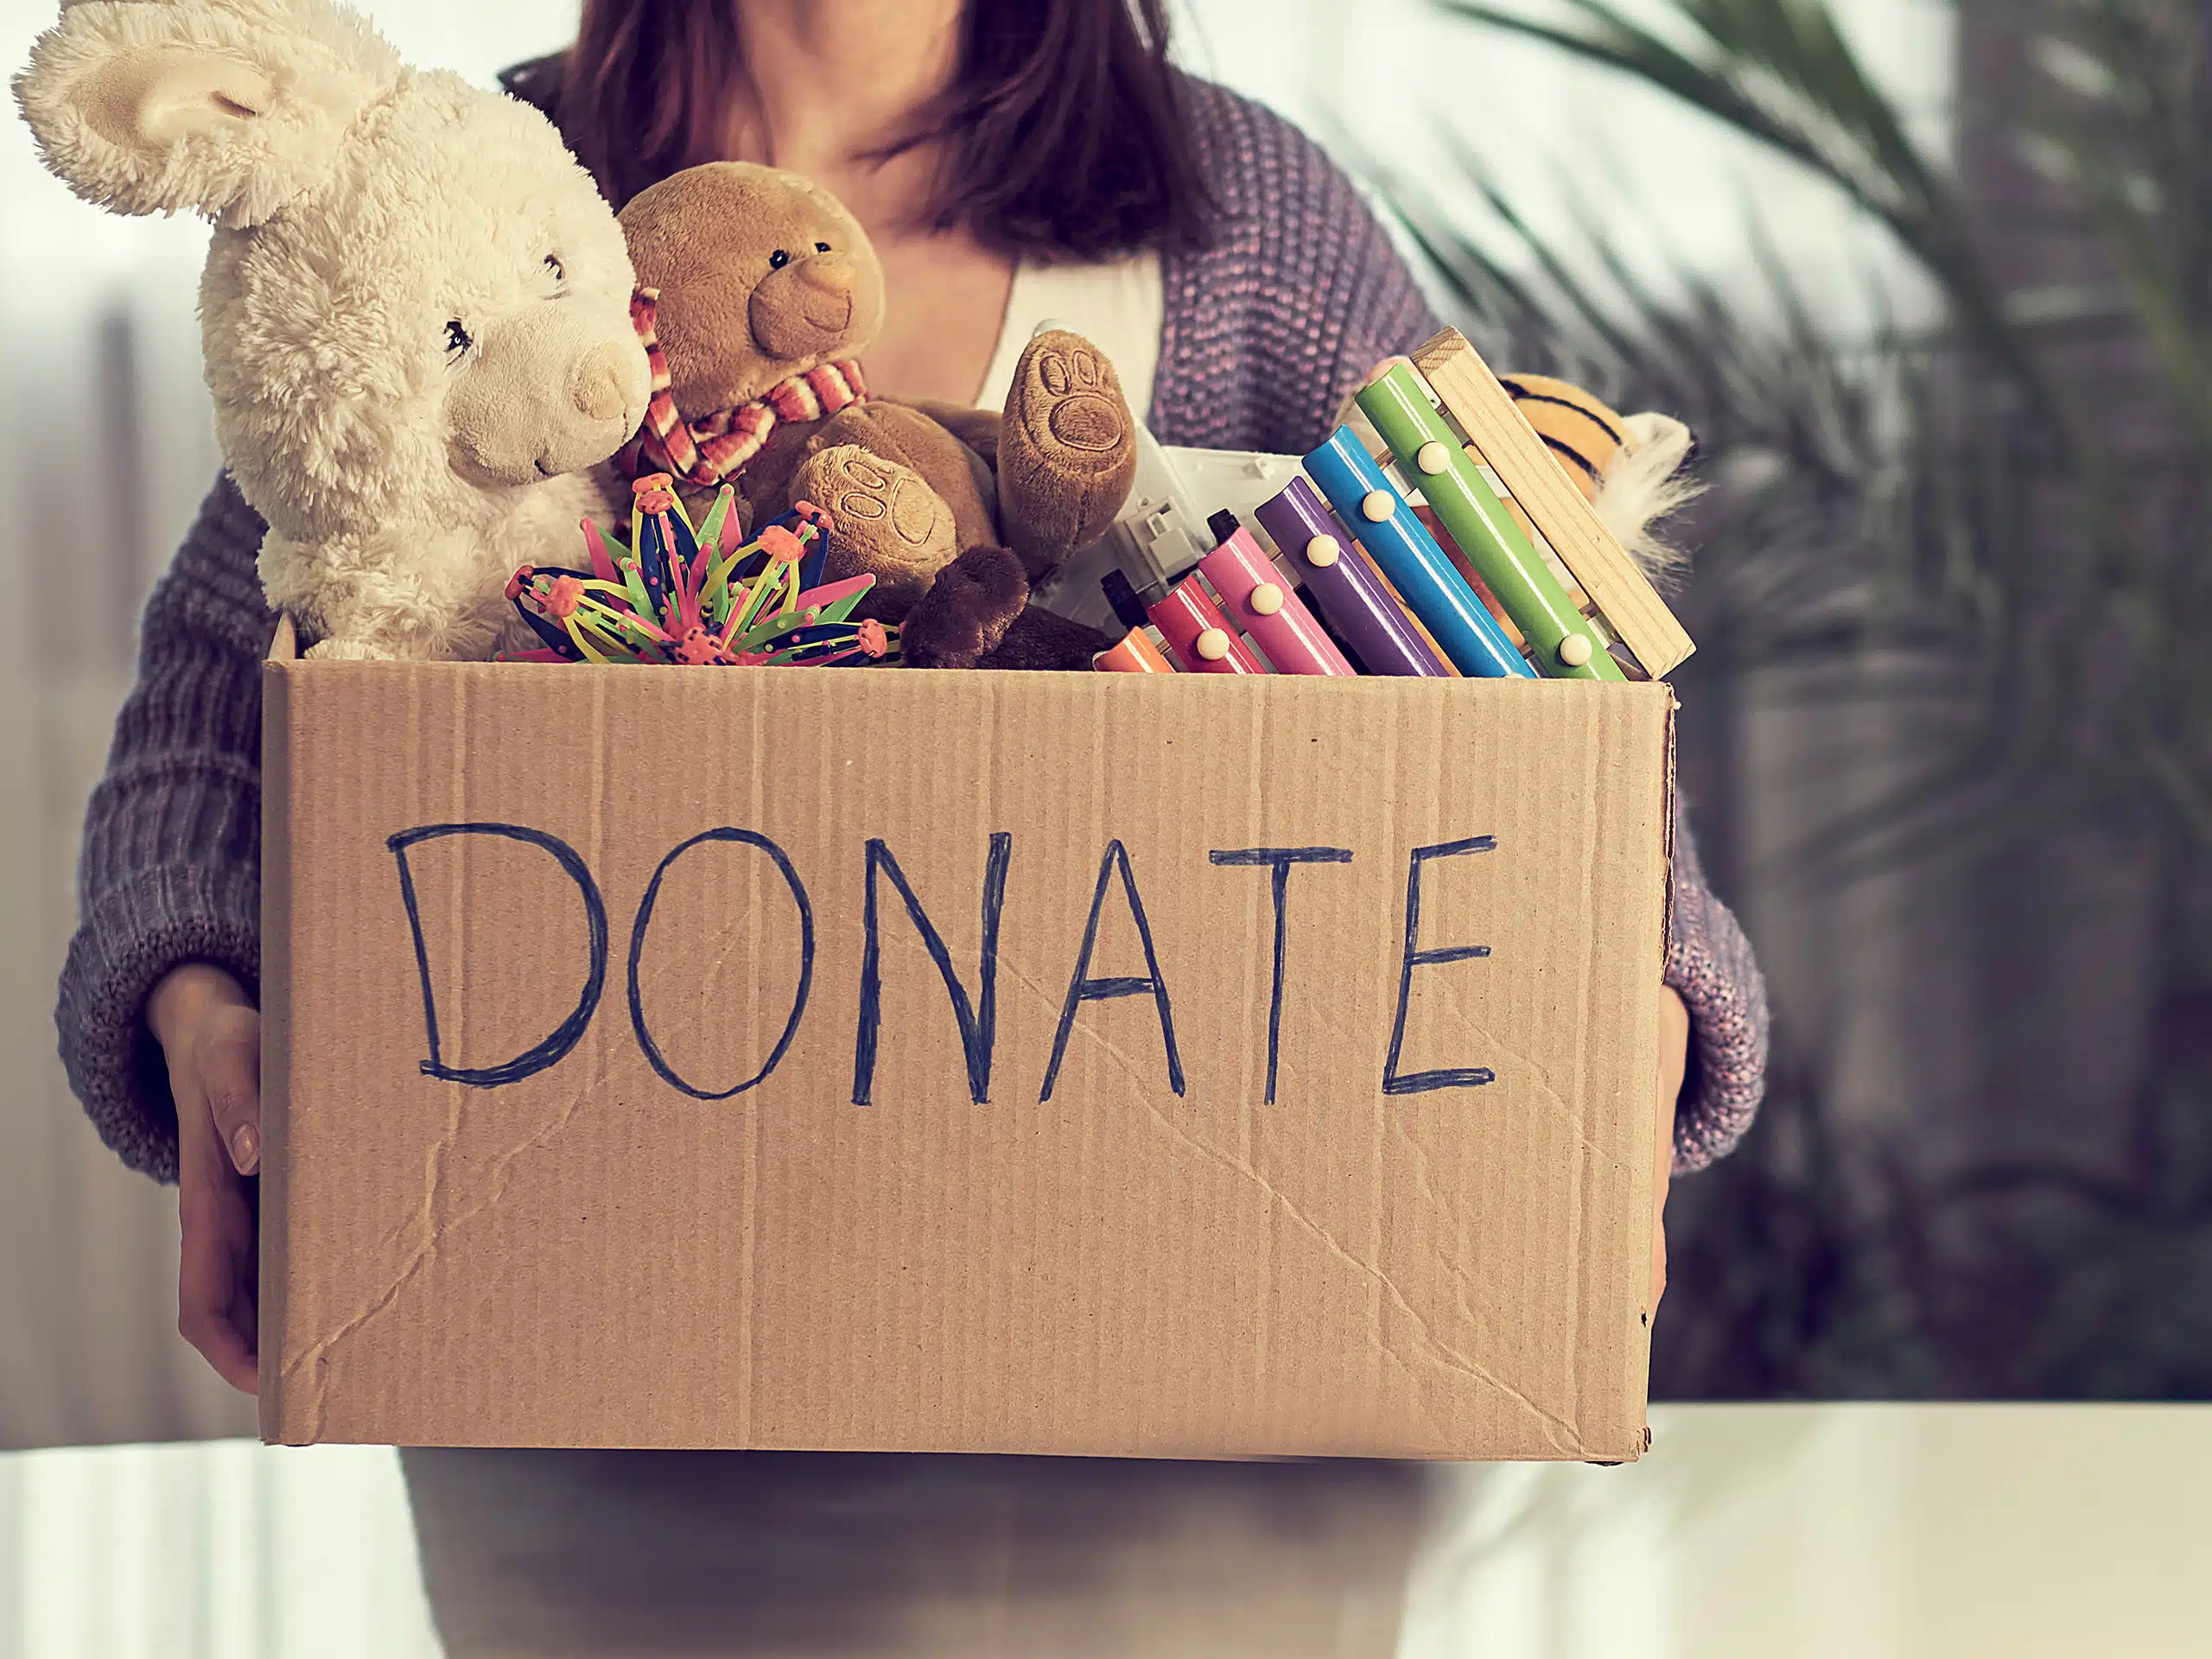 Seeks Donations For Toy Drive